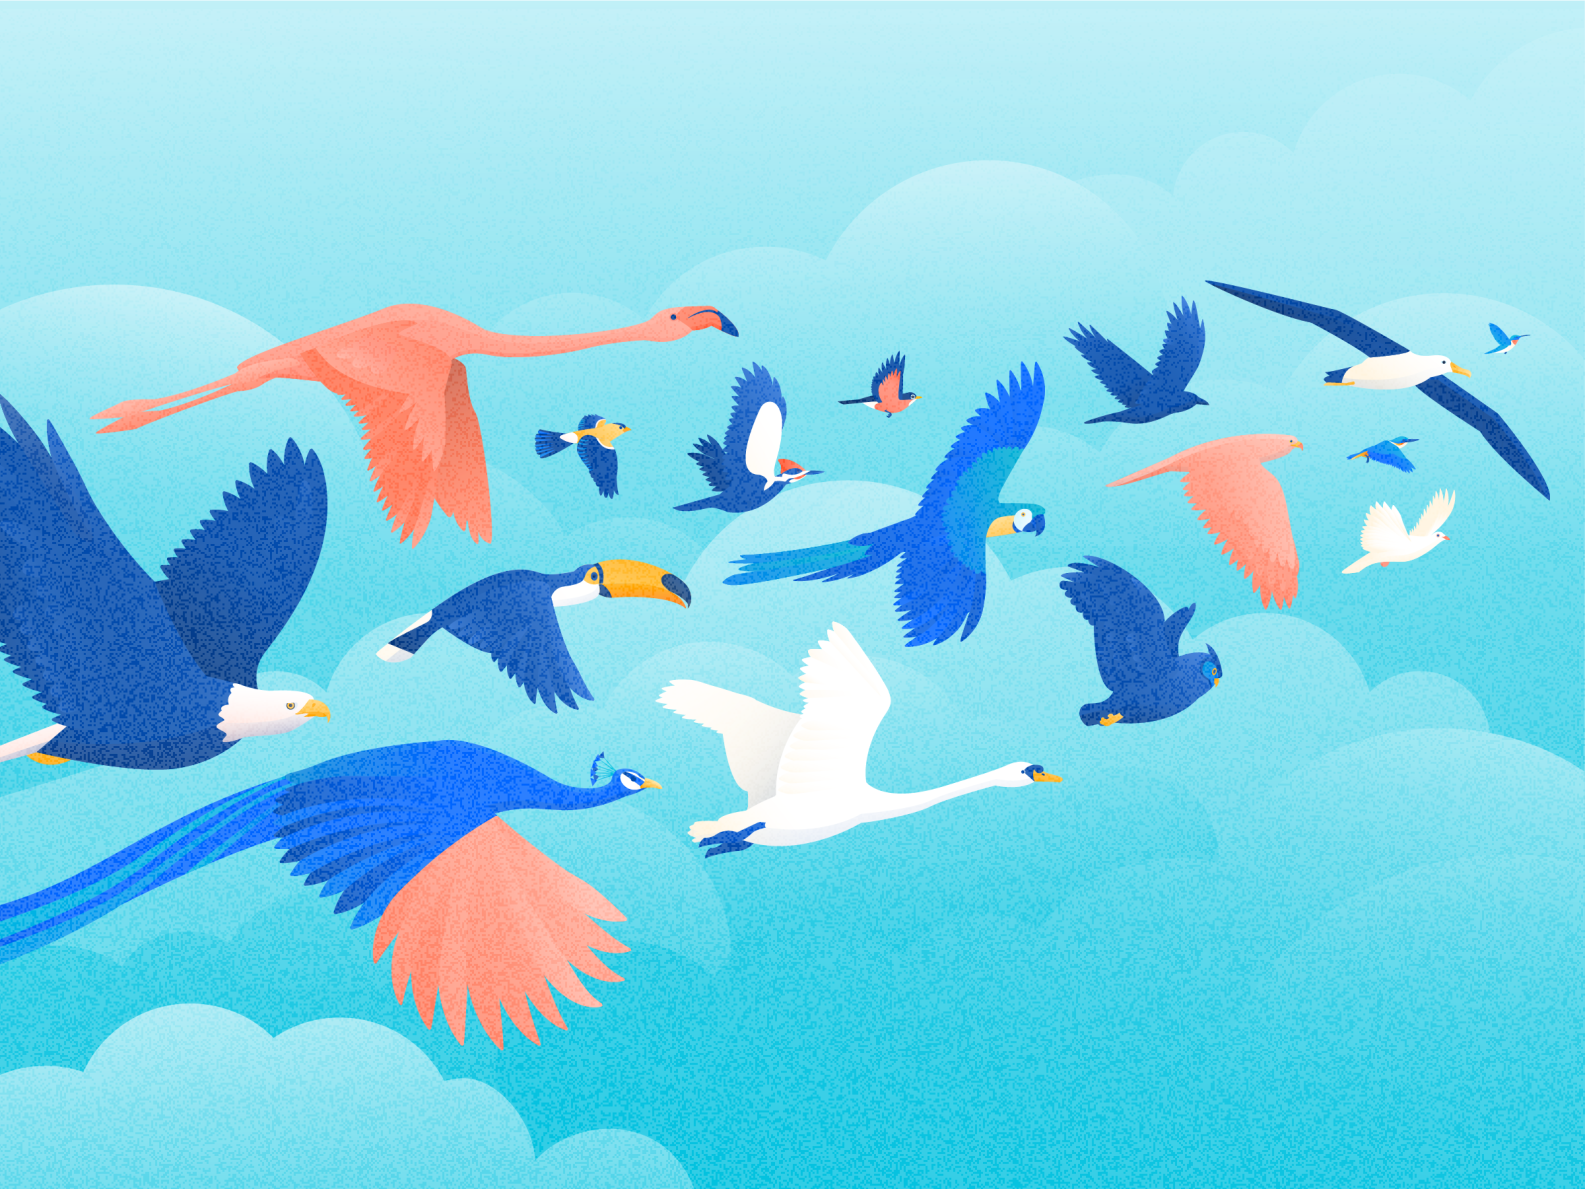 Birds of a feather flock together by Sari Jack on Dribbble